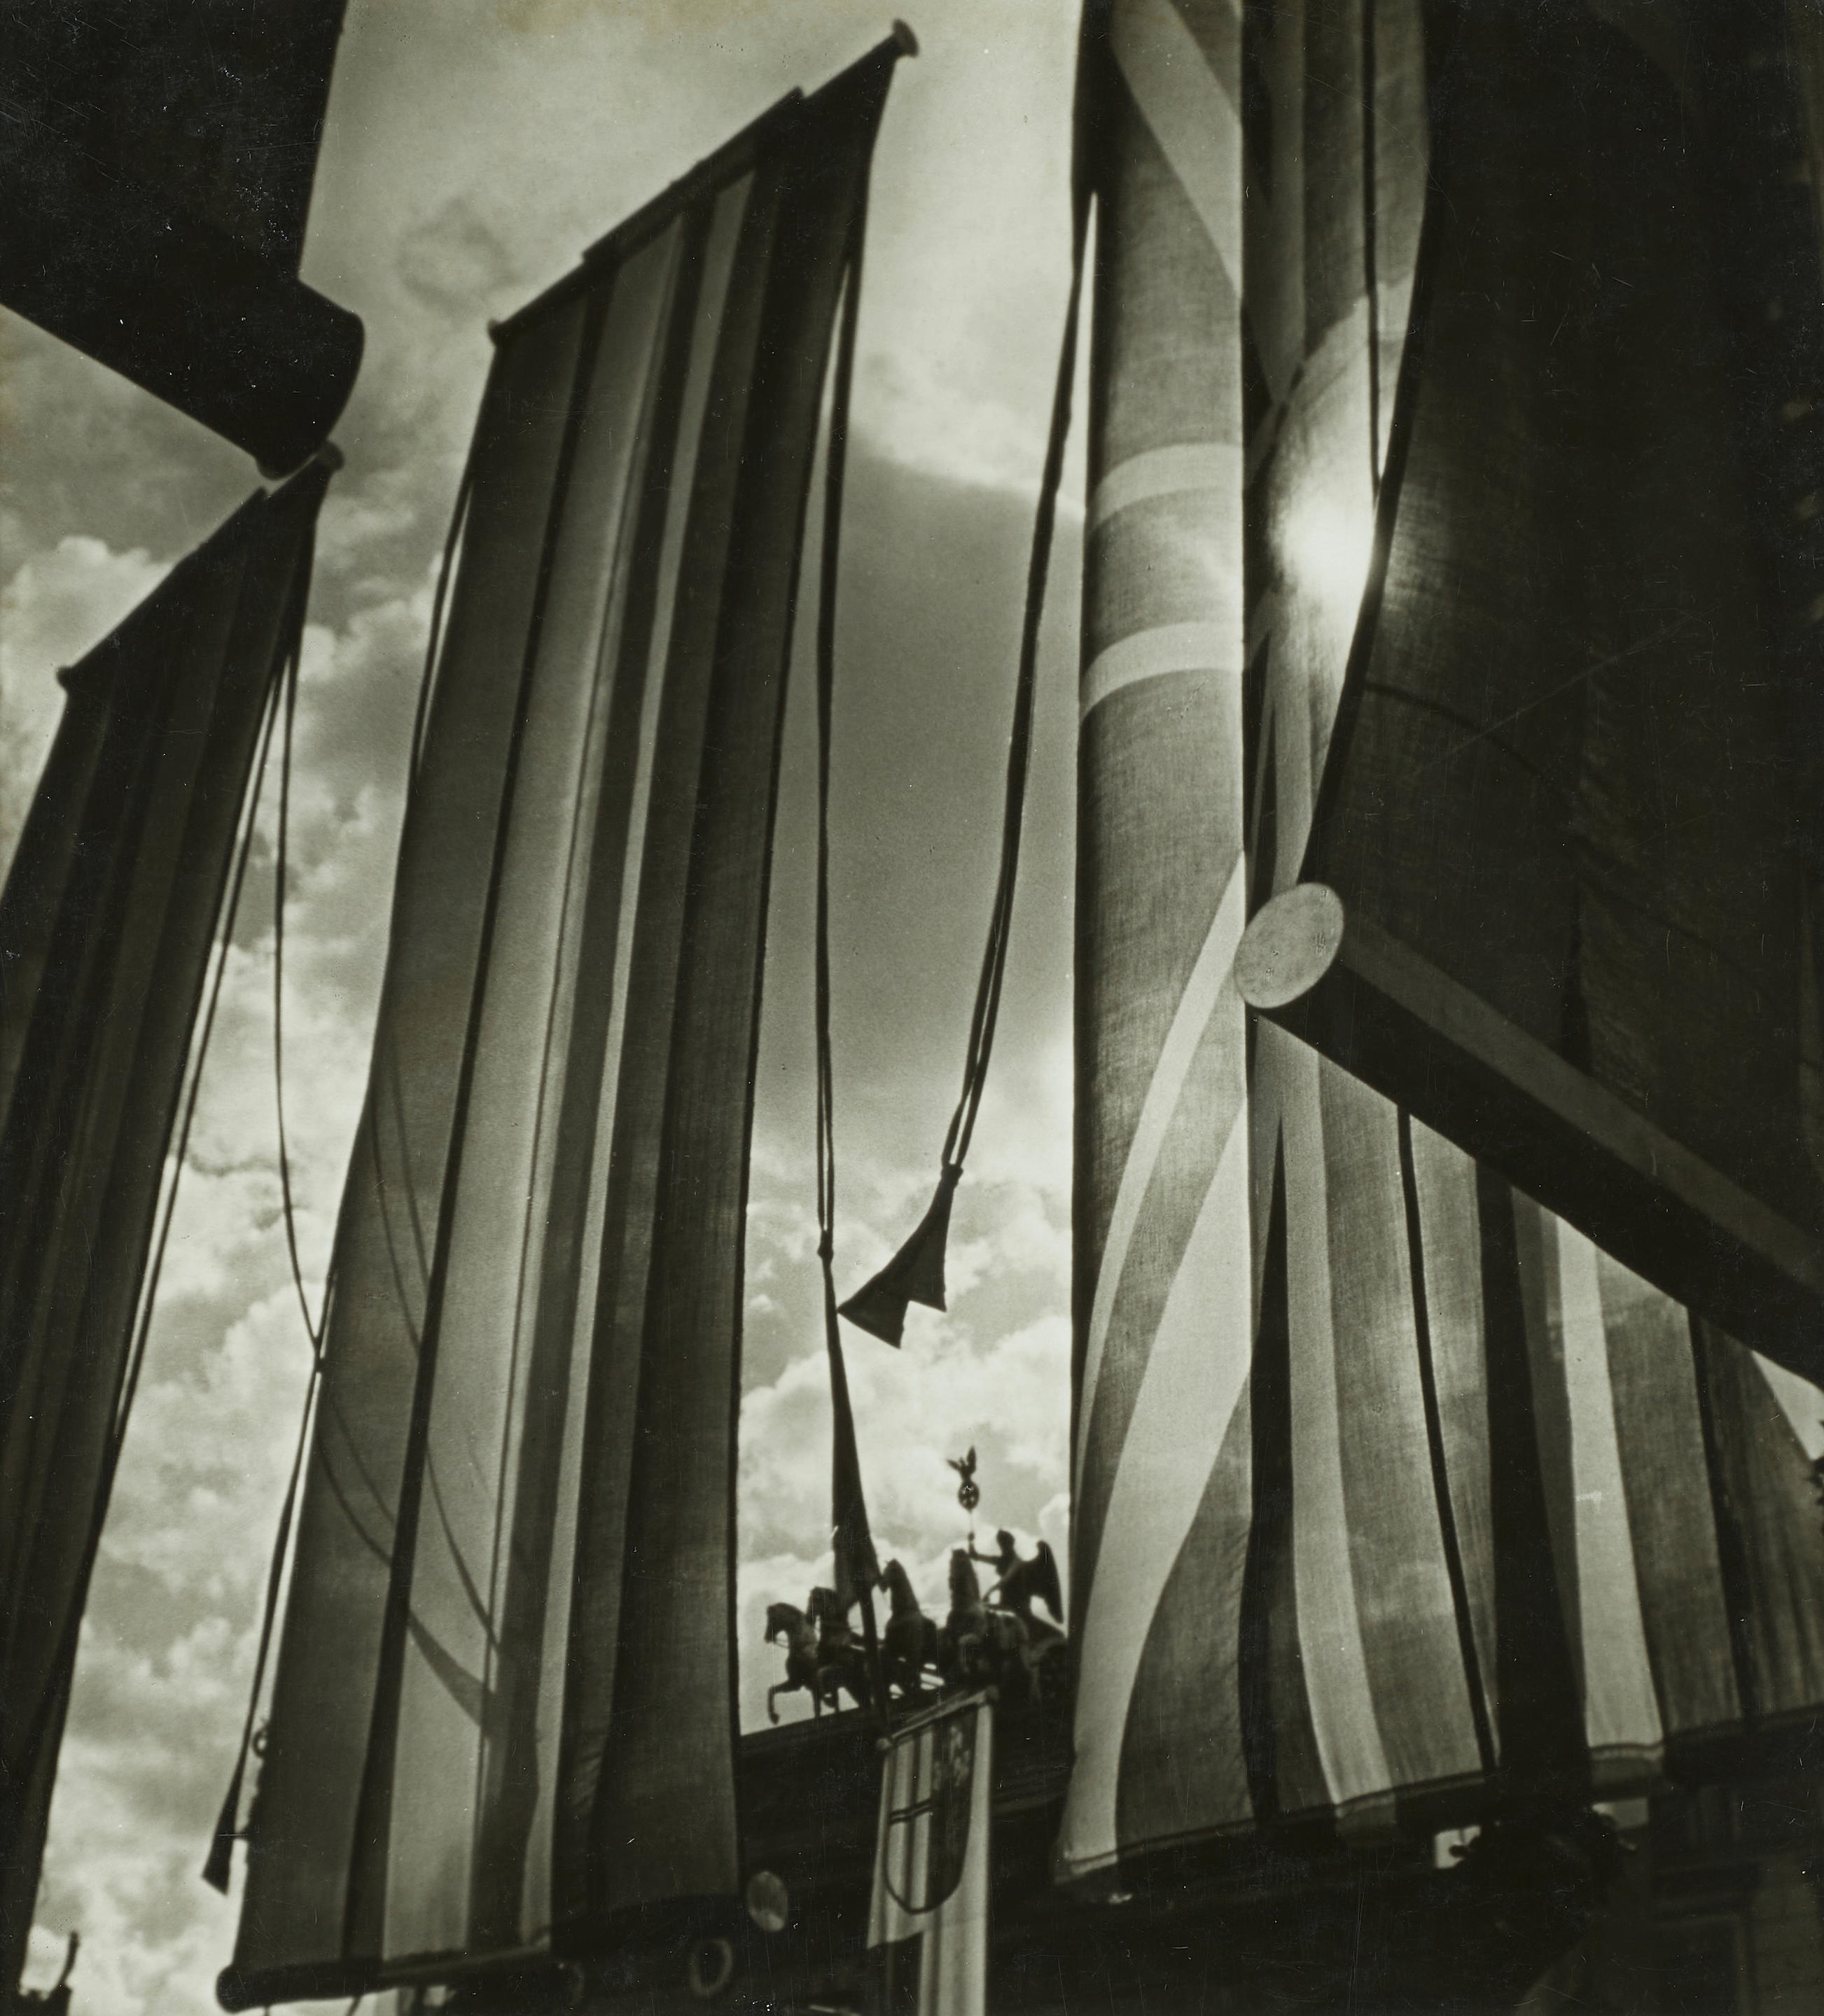 Study of Flags, 1936 Olympics, Berlin - Leni Riefenstahl